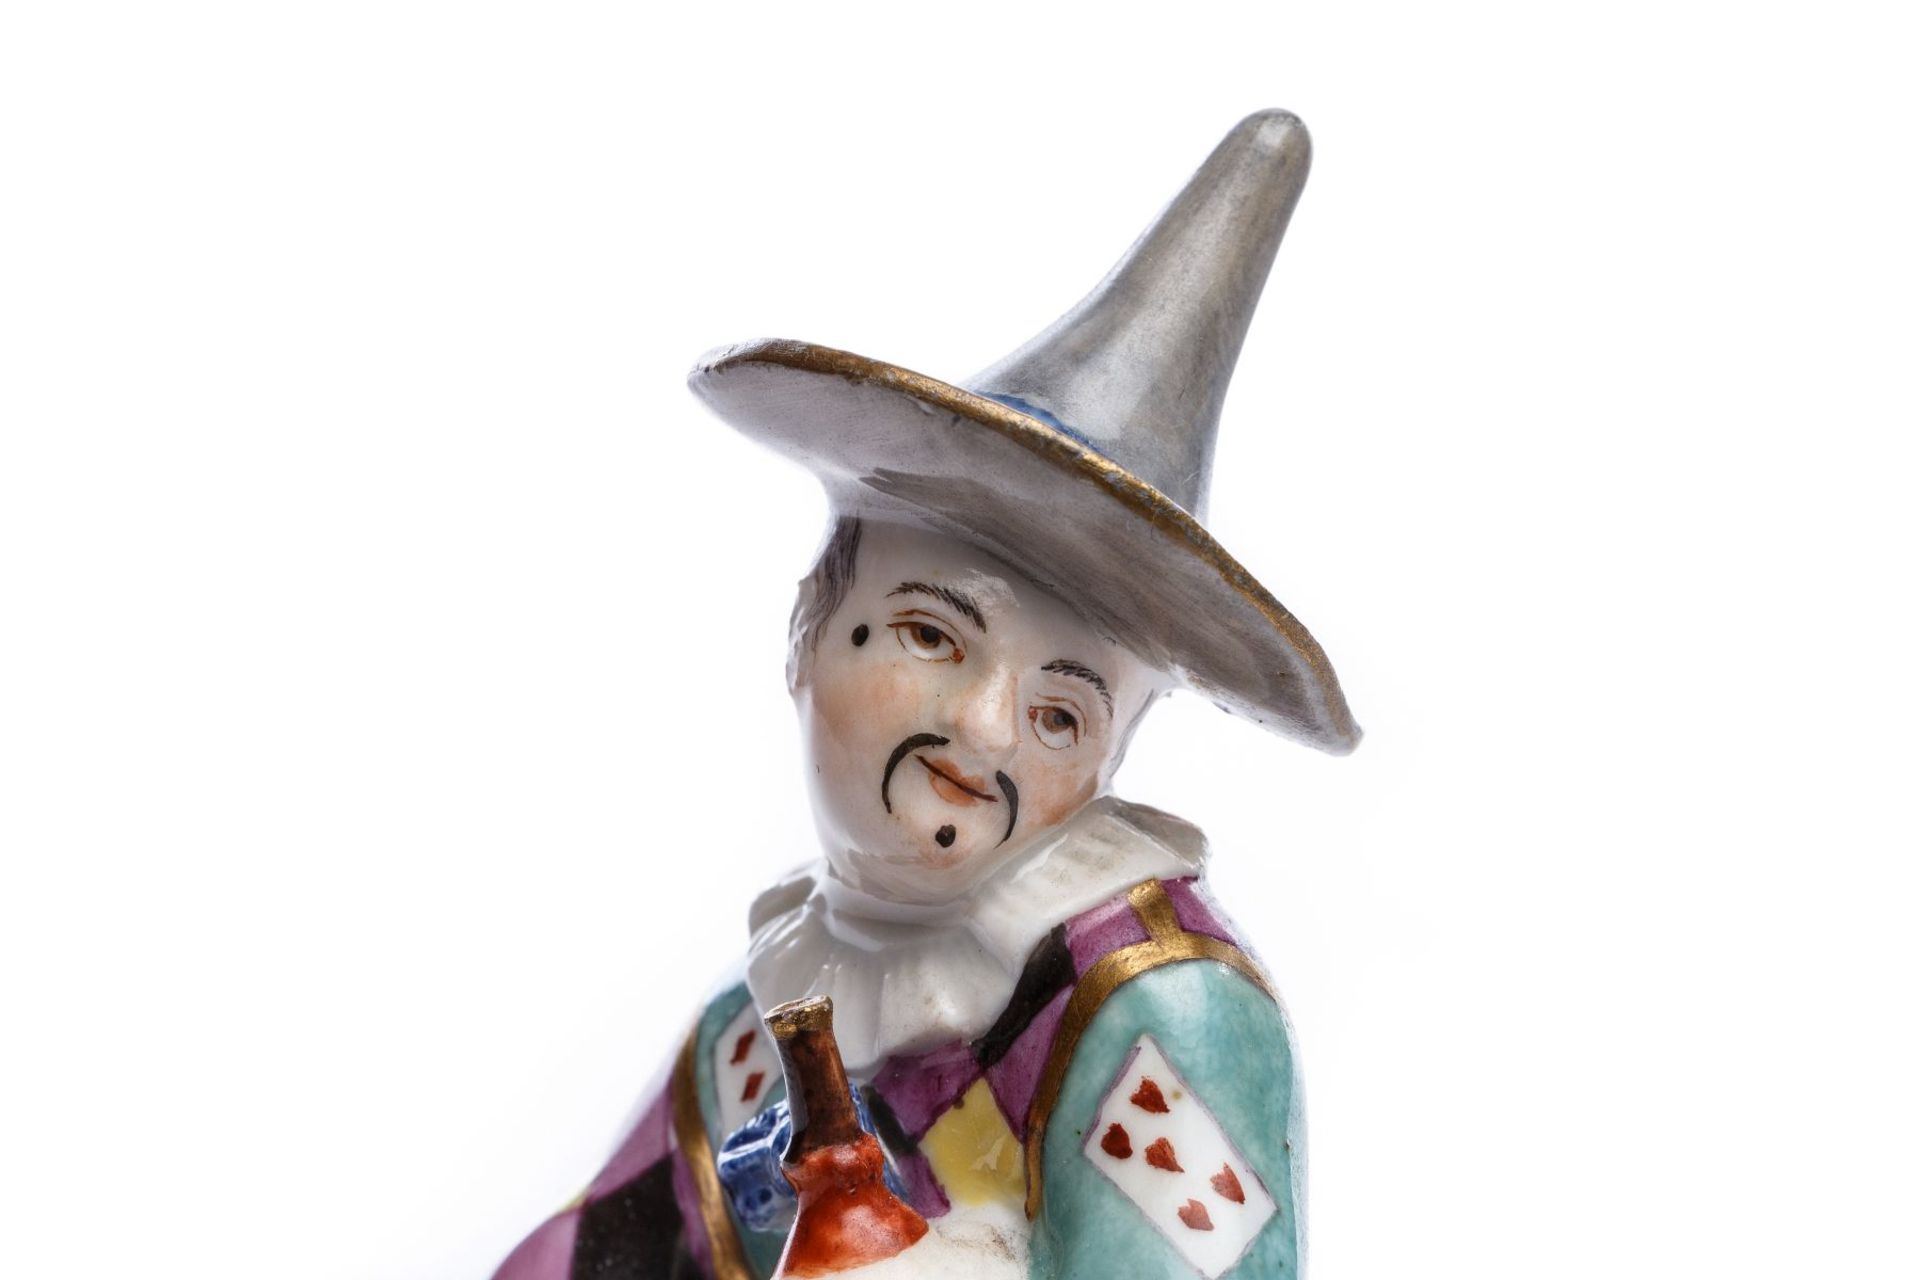 Small figure "Harlequin with bagpipes", Meissen 1720 - Image 3 of 4